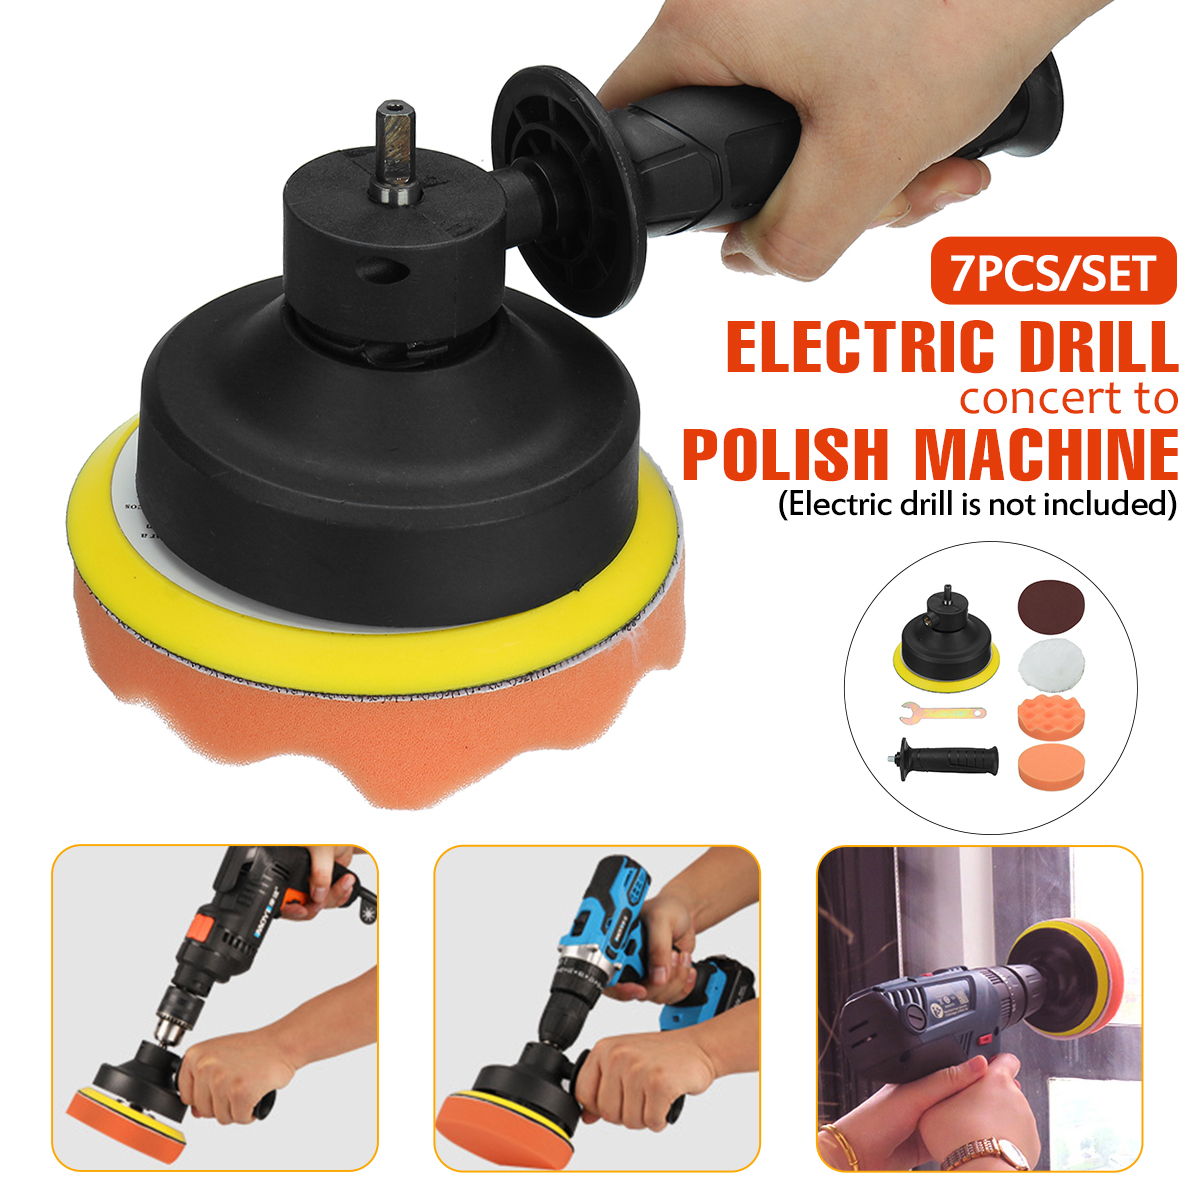 125mm-Electric-Polisher-Accessories-Set-Electric-Drill-to-Polish-Machine-Conversion-Head-For-Polishi-1918289-1